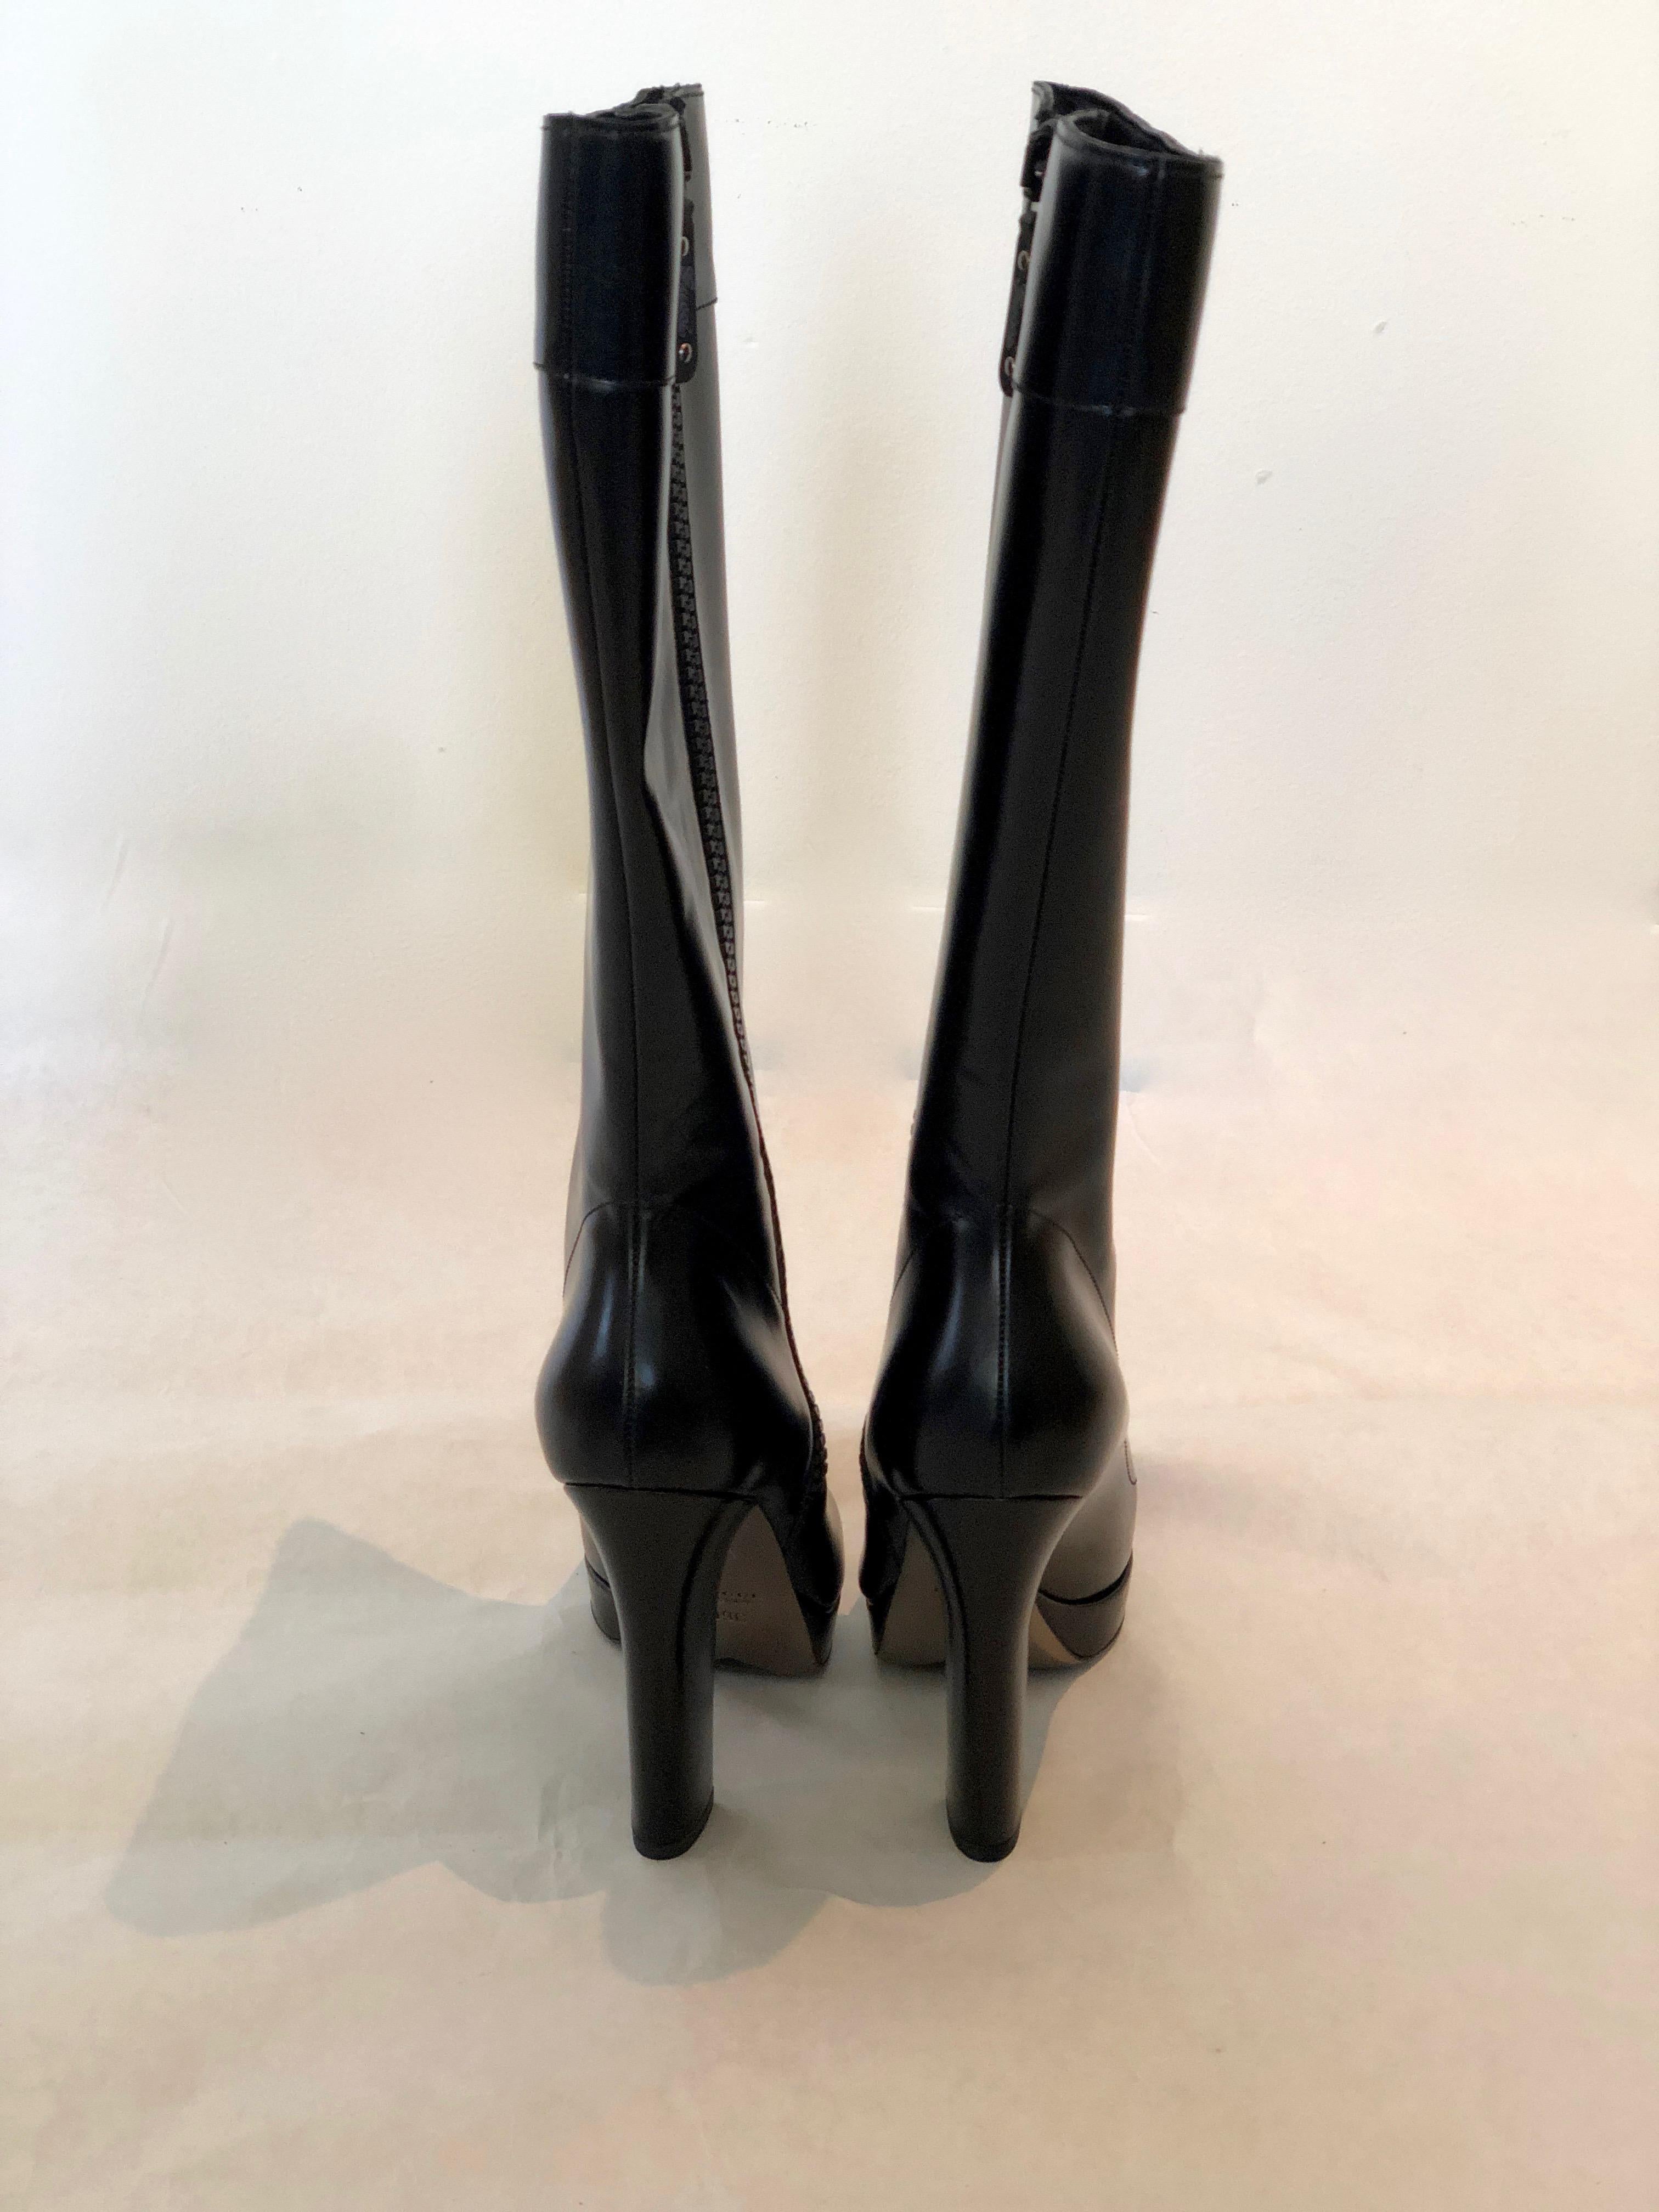 Pair of Gucci Shiny Black Side Zip Pointy Toe Platform and Heeled Knee Boots In Excellent Condition For Sale In Houston, TX